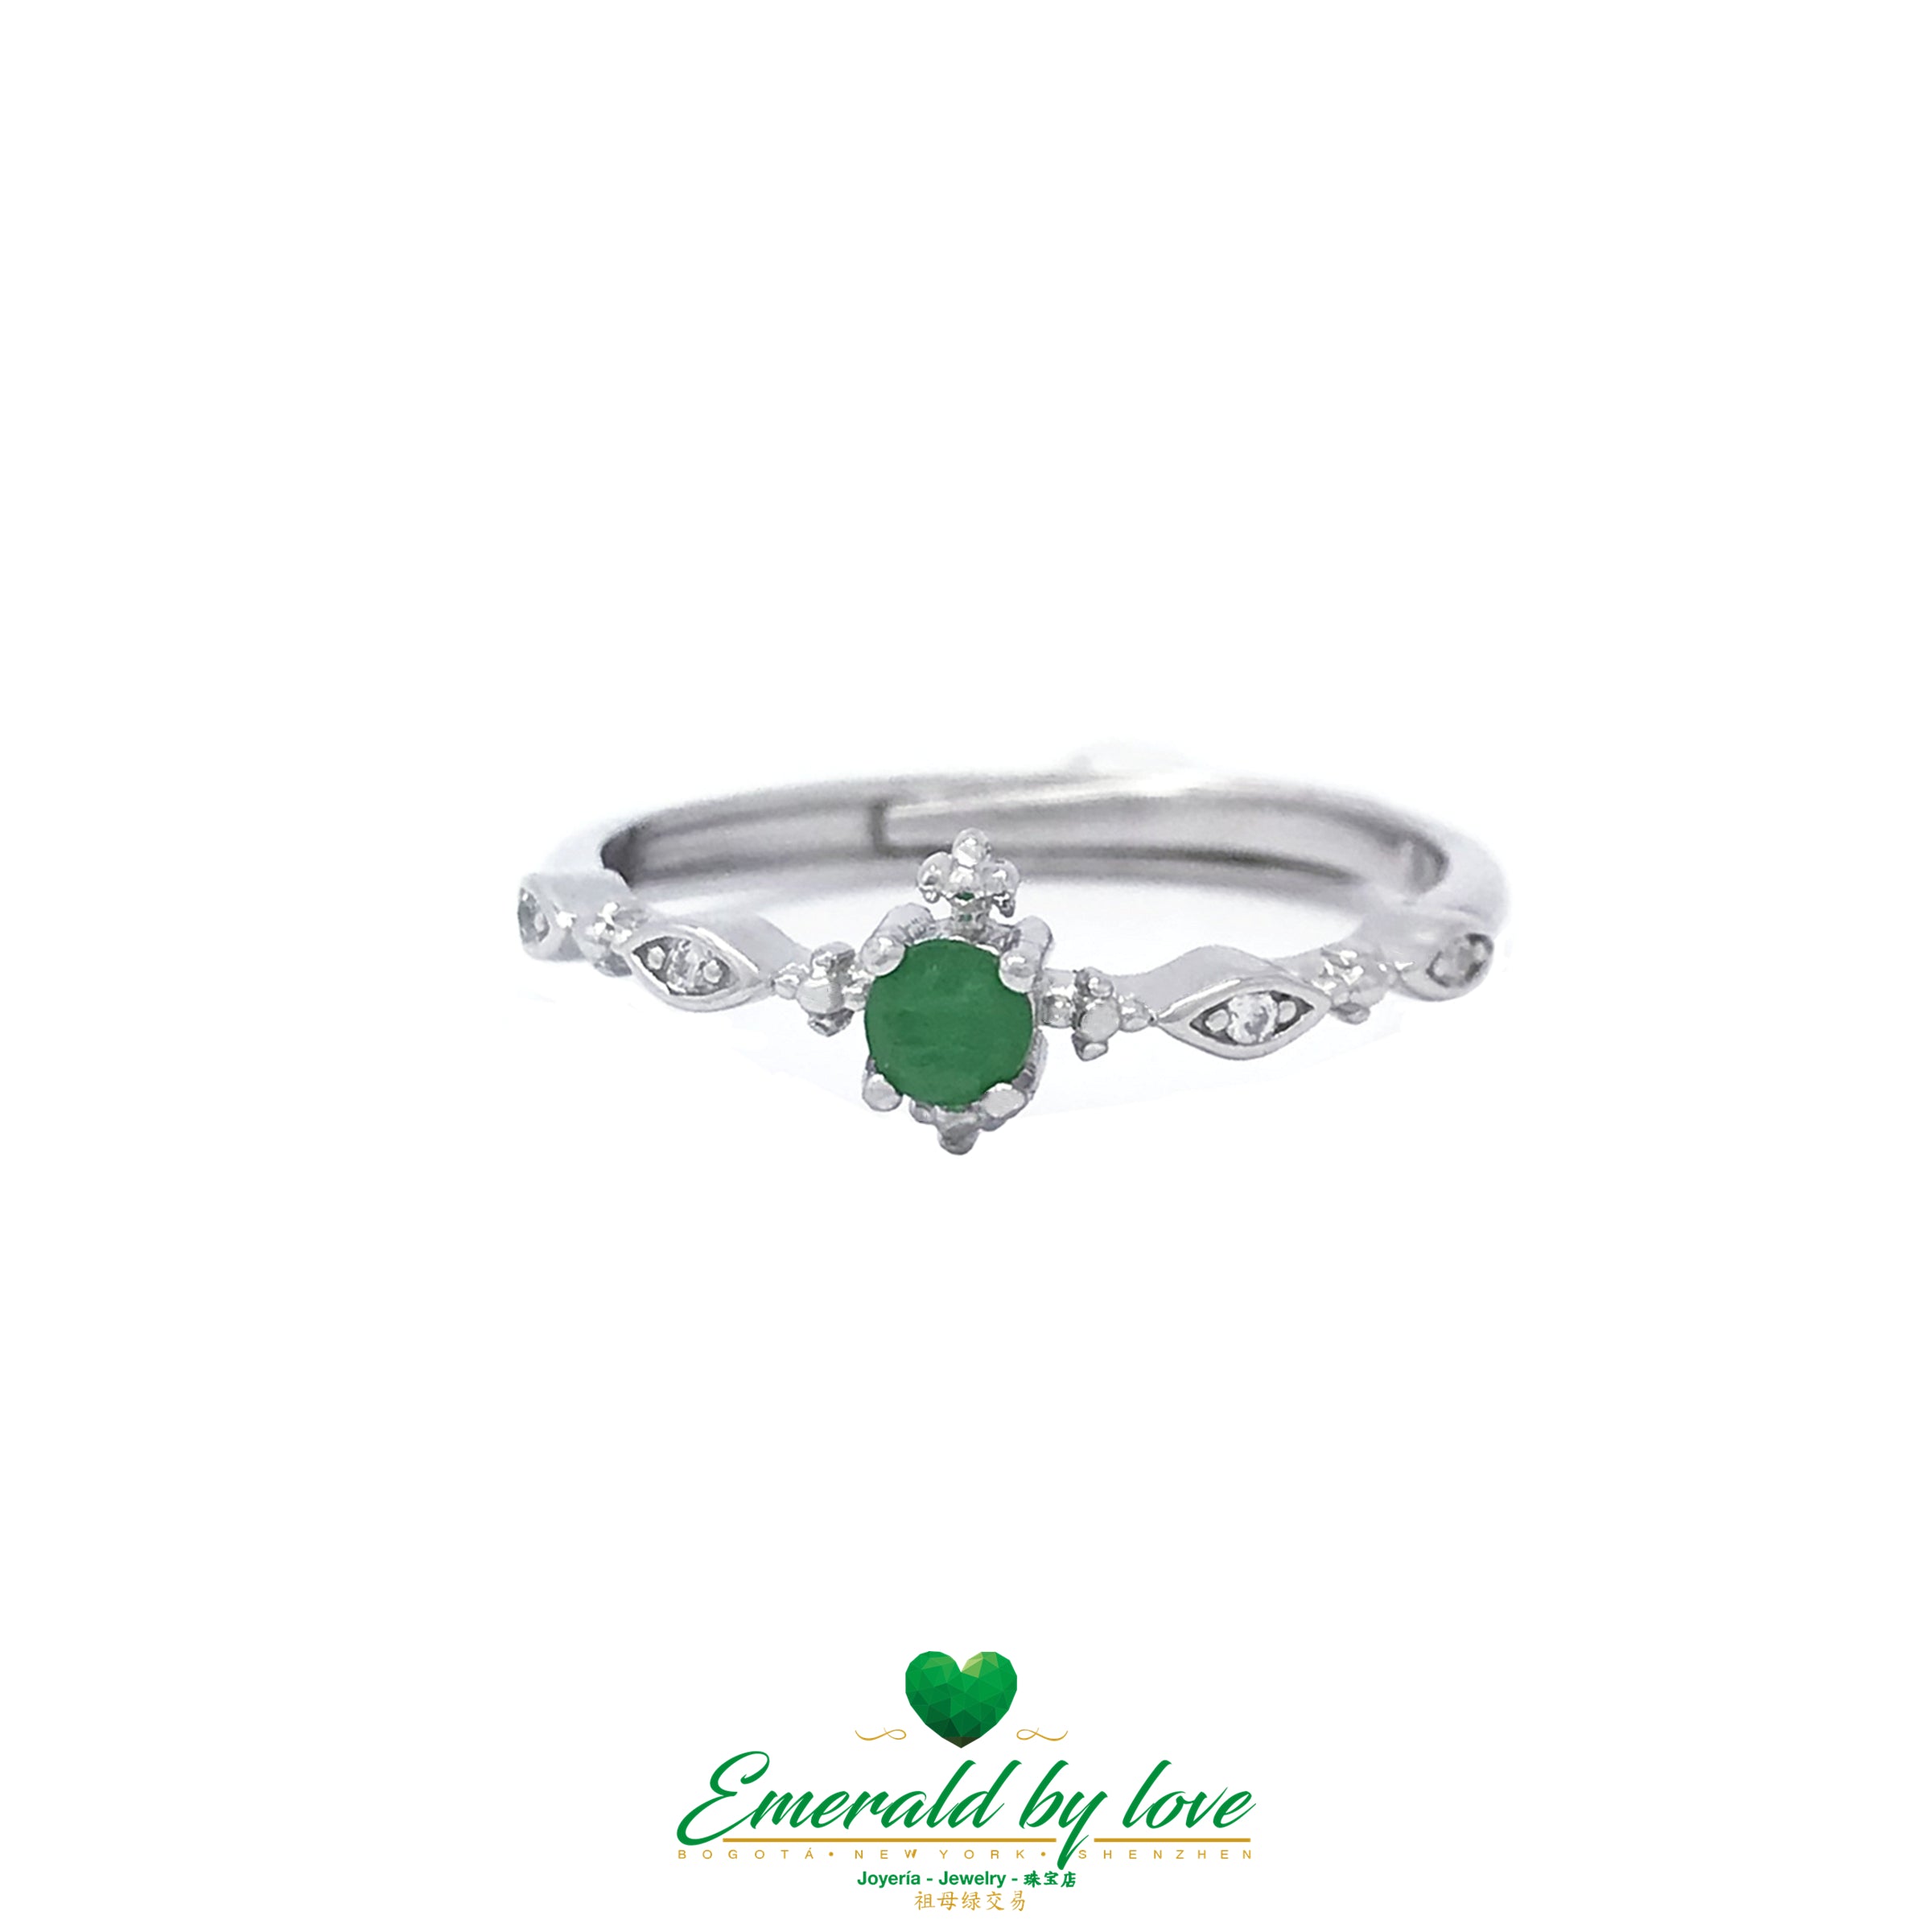 Slim Band Ring with CZ Embellishments and Round Central Emerald: Delicate Glamour